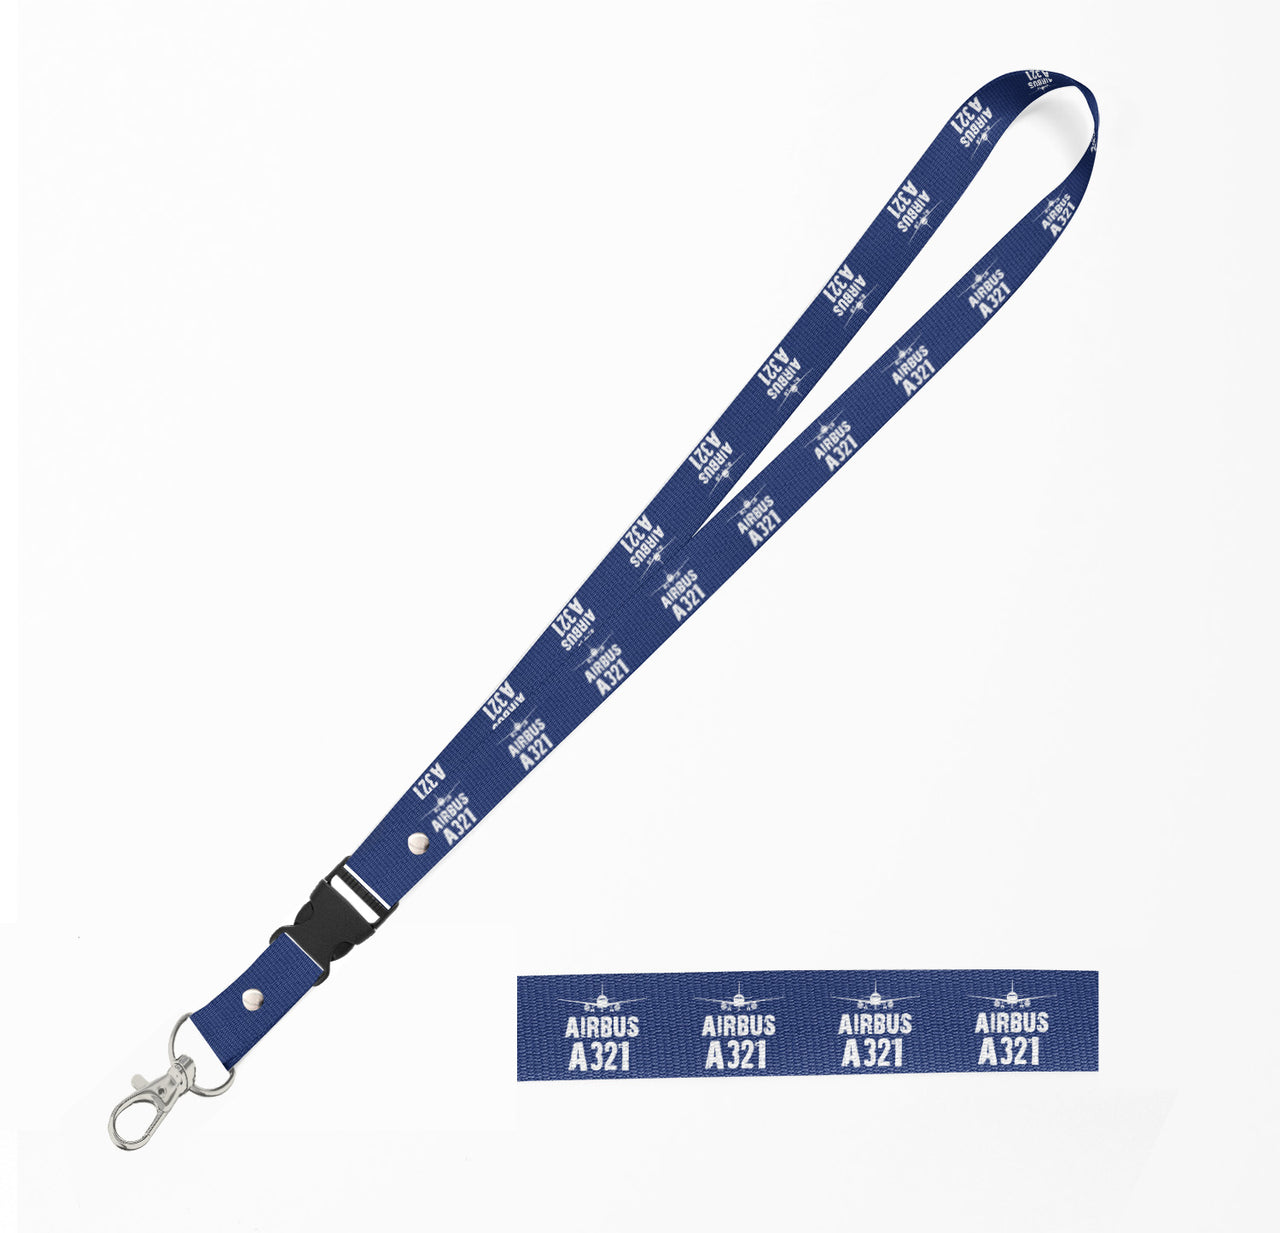 Airbus A321 & Plane Designed Detachable Lanyard & ID Holders